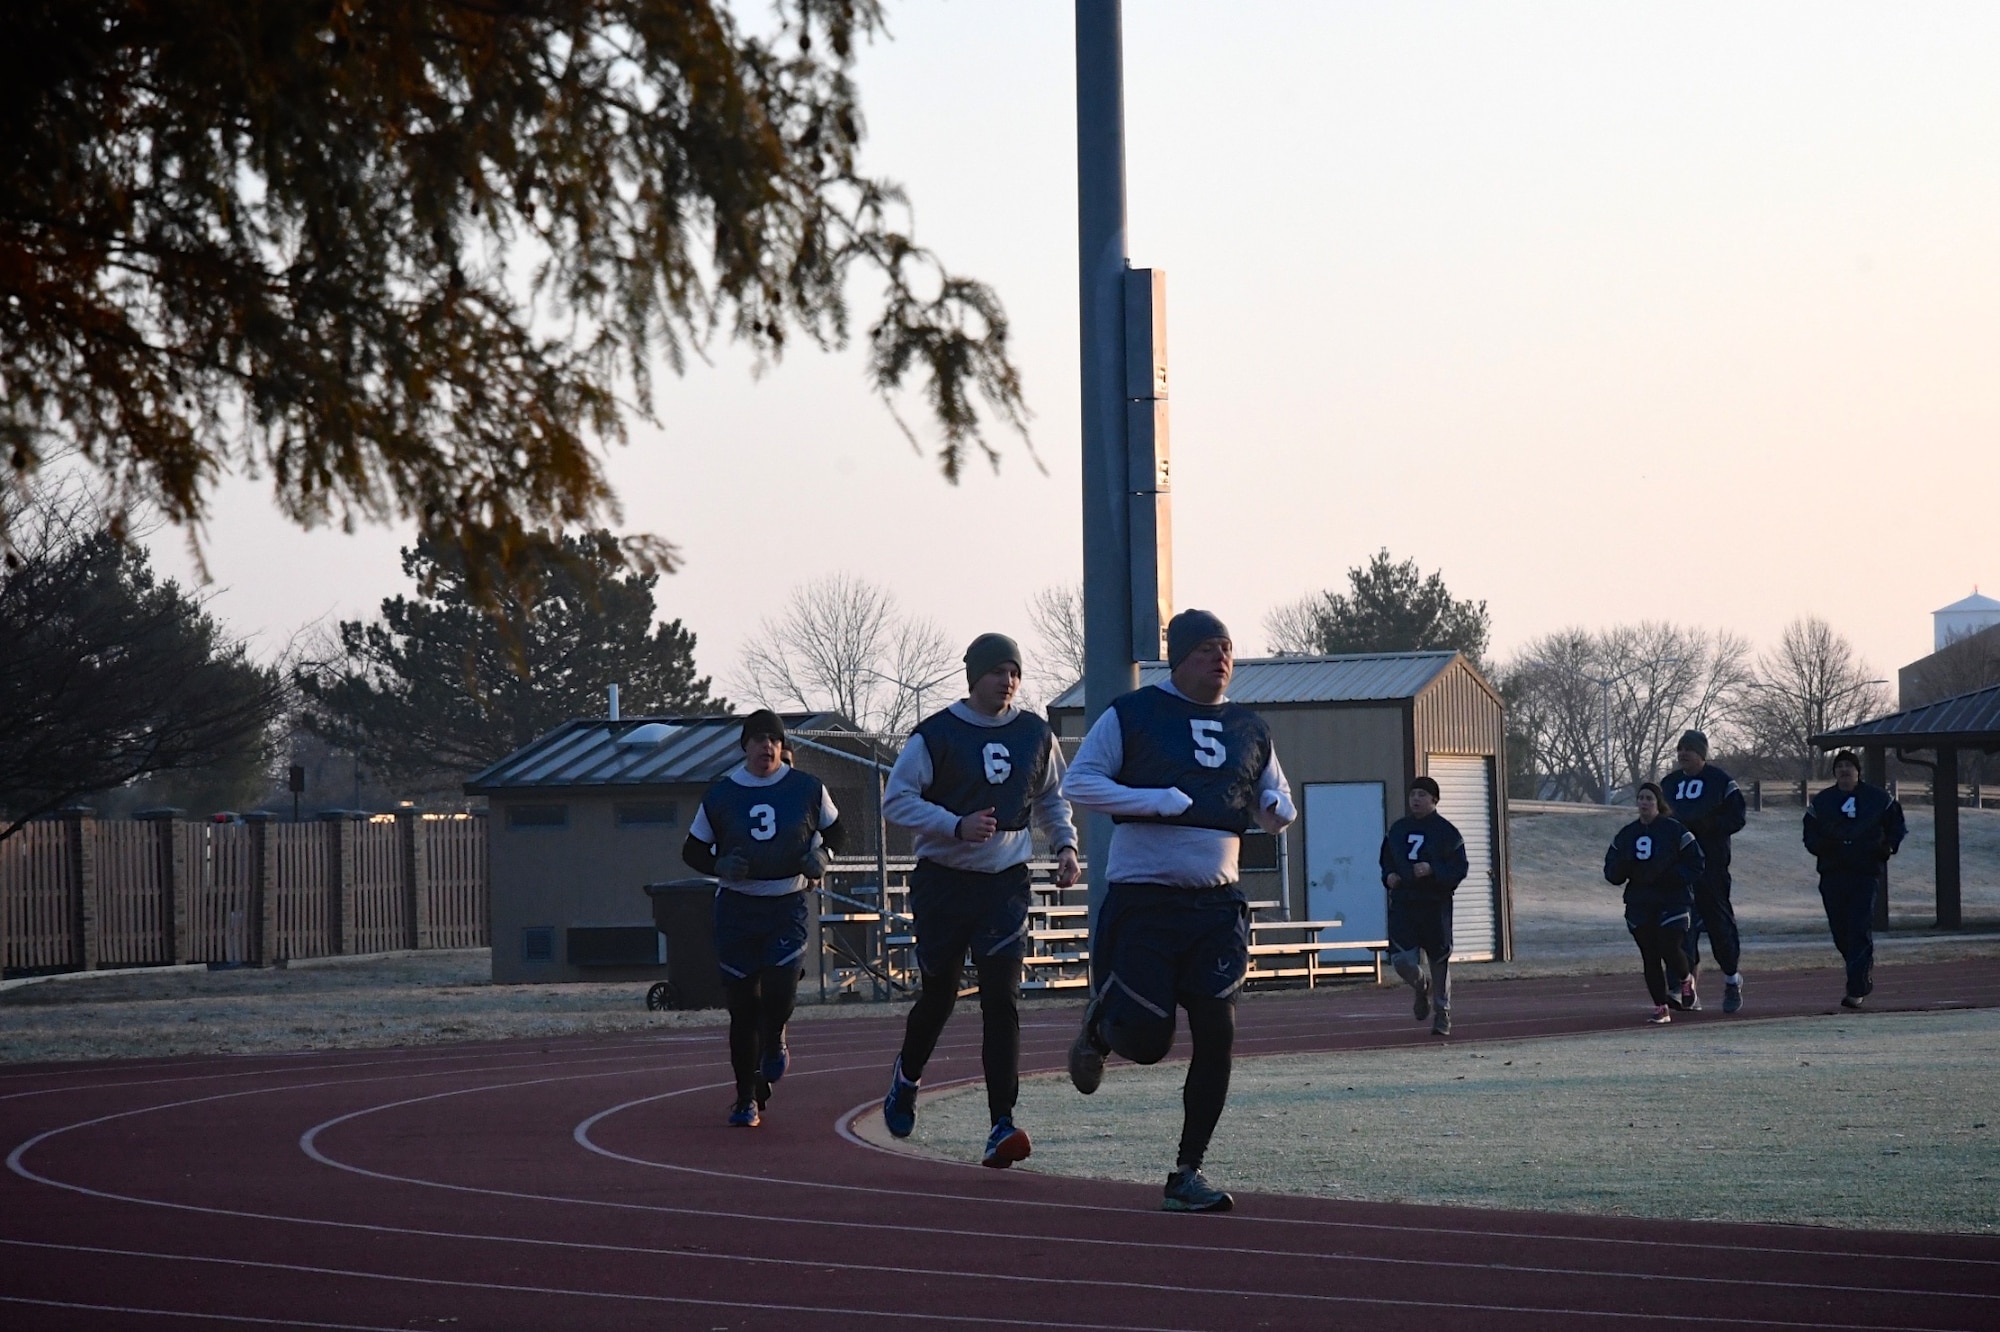 Airmen of the Air Force Reserve Command complete another 400 meter lap, number four of six recently achieved.  932nd Airlift Wing Citizen Airmen reservists perform the 1.5 mile run as part of the Air Force fitness assessment recently at Scott Air Force Base, Illinois. The weather was a bit chilly at 6:30 a.m., but winds were calm and pleasantly warm once the sun rose Nov. 16, 2019. Reservists from more than 30 states come to train each month at the Illinois unit known among reserve units as the "Gateway Wing" due to its proximity to the Saint Louis arch. Fitness test also include pushups, sit-ups and height and weight measurements. Staying fit throughout the year helps keep Airmen ready for any future challenges.  (U.S. Air Force photo by Lt. Coi. Stan Paregien)